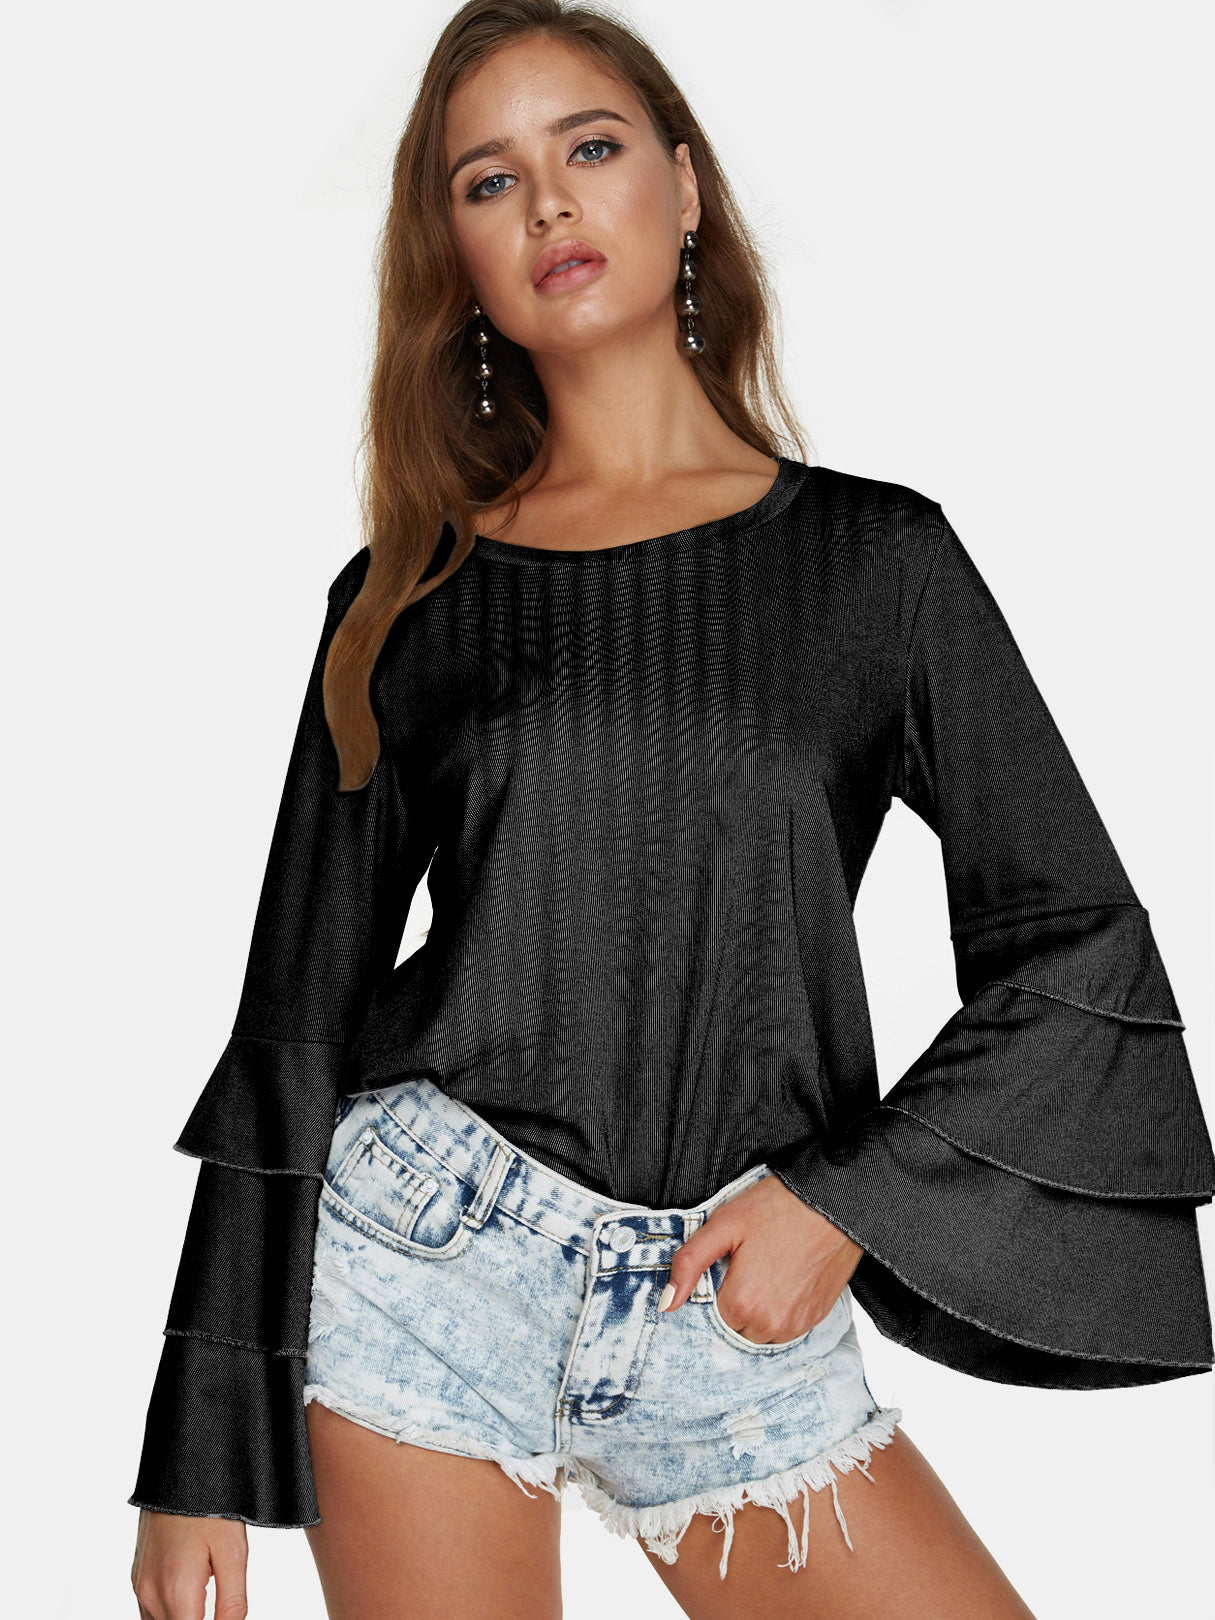 Custom Online Shopping For Ladies Long Tops In India